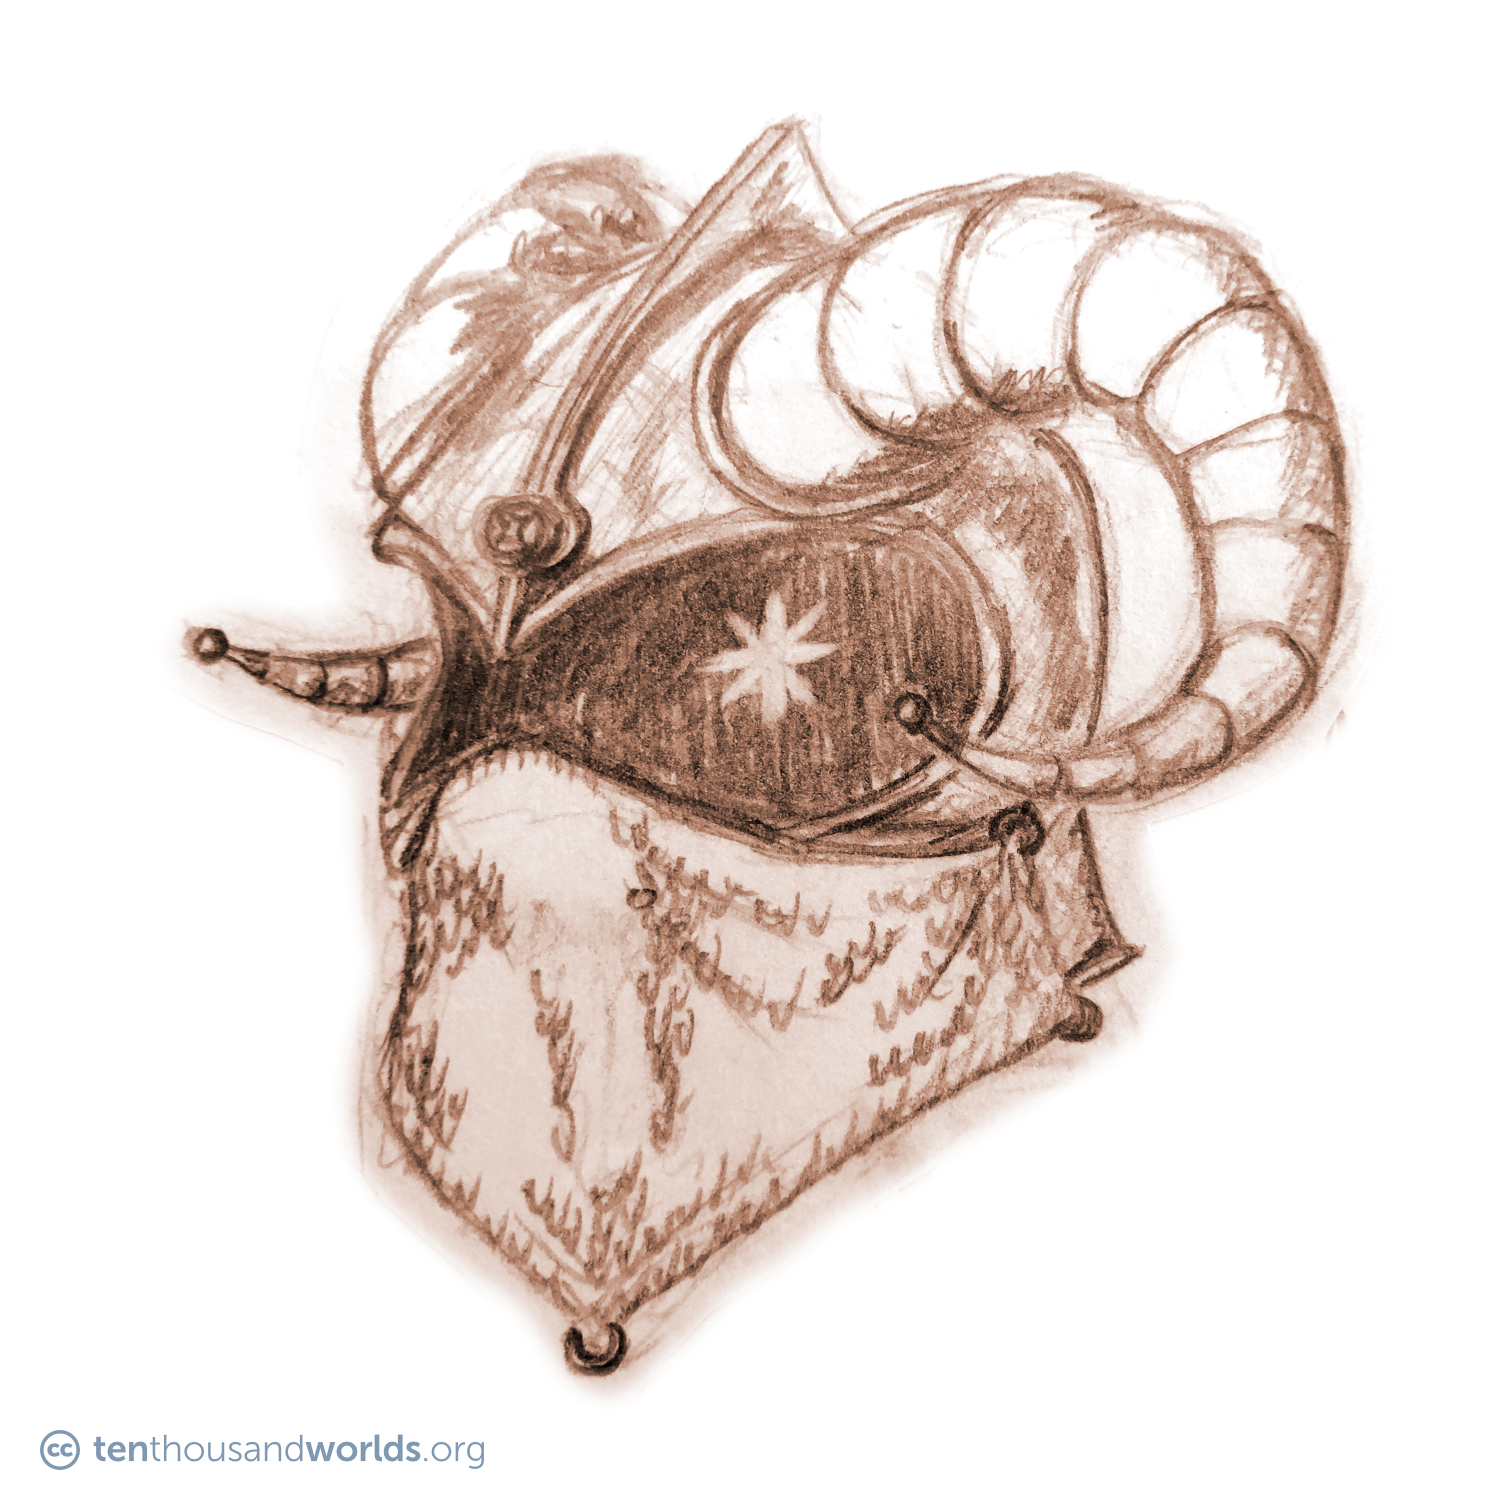 A pencil sketch of a bullet-shaped helmet adorned with a central fin, a jewel set in the forehead, and a massive pair of ram’s horns. A chain-mail veil protects the area around the nose and mouth. An eerie light glimmers deep within the left eye hole.